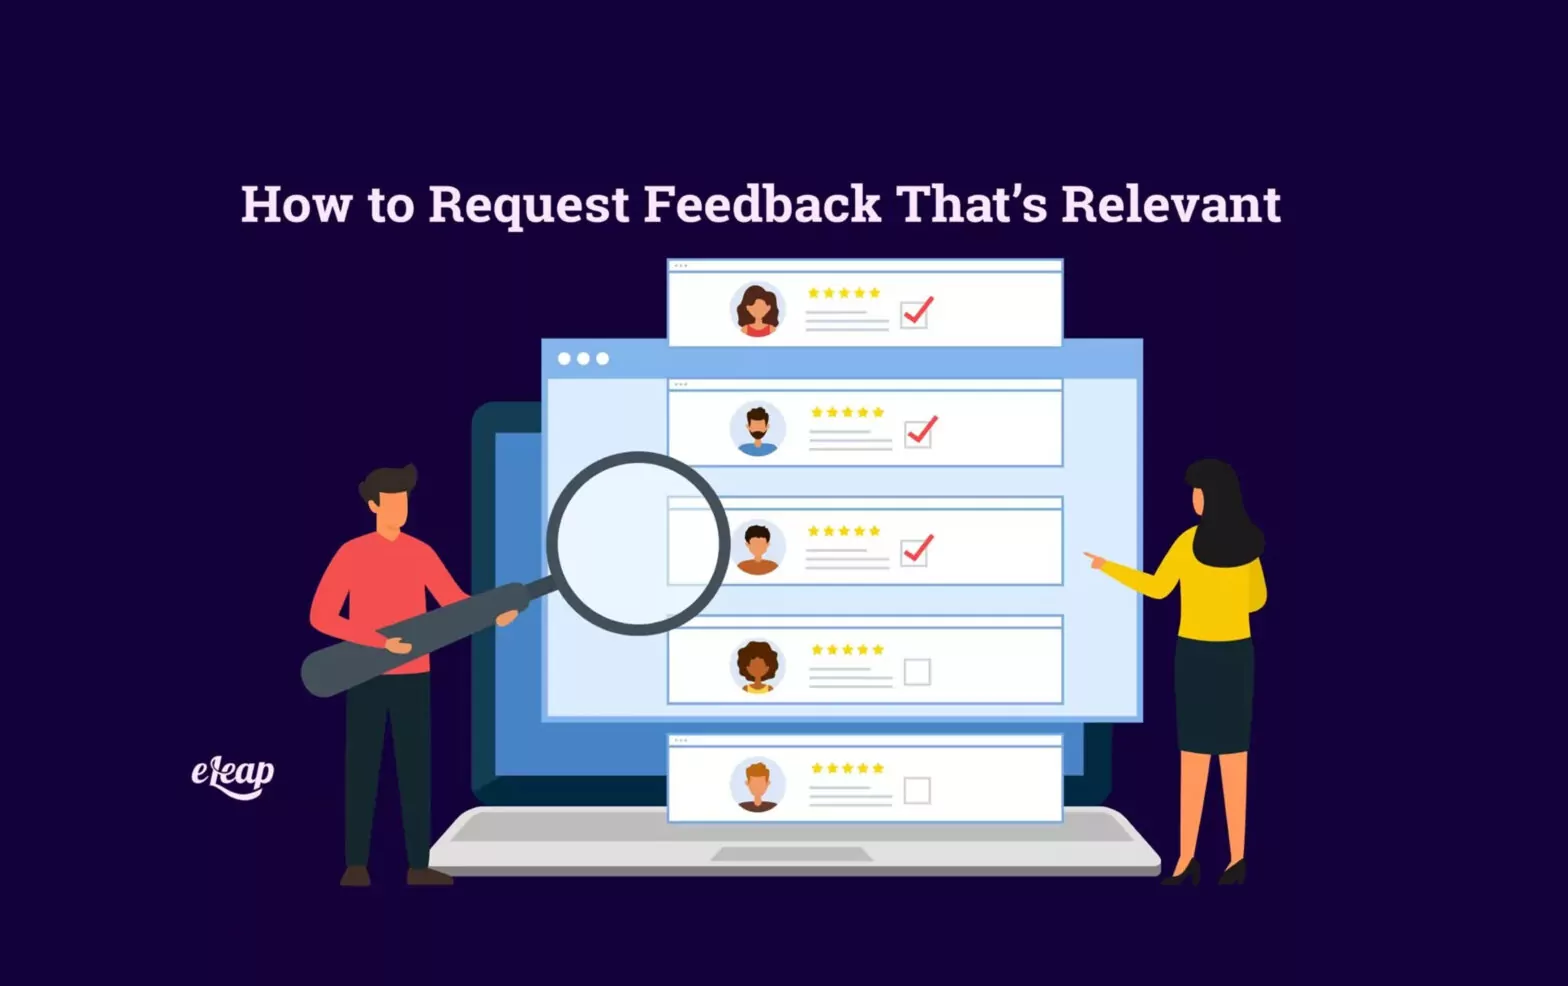 How to Request Feedback That’s Relevant